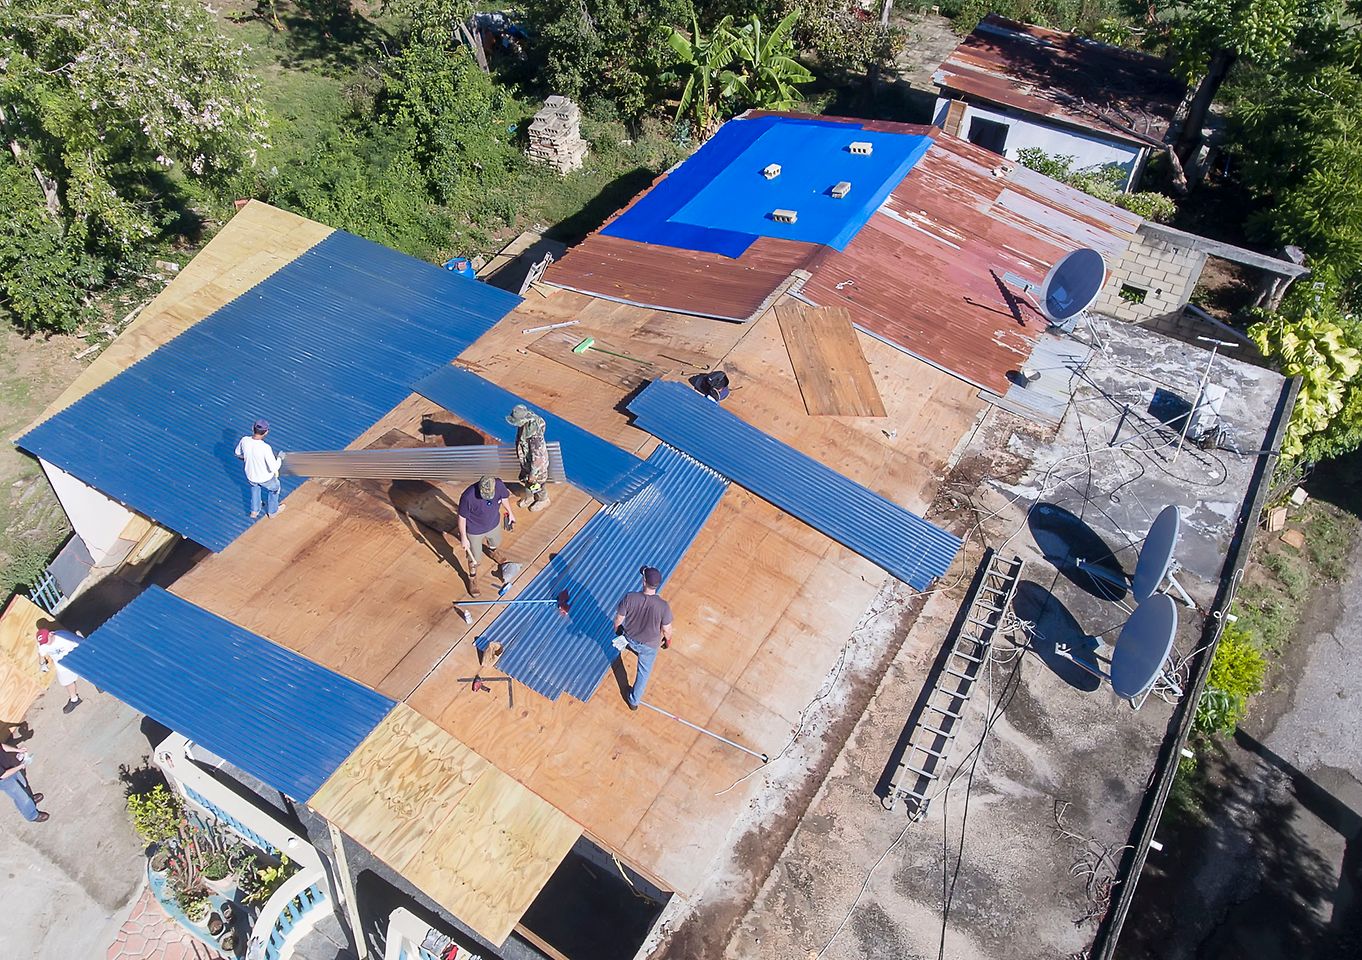 Another group reconstructed a partially destroyed roof of a house occupied by a local Henkel employee and her family.